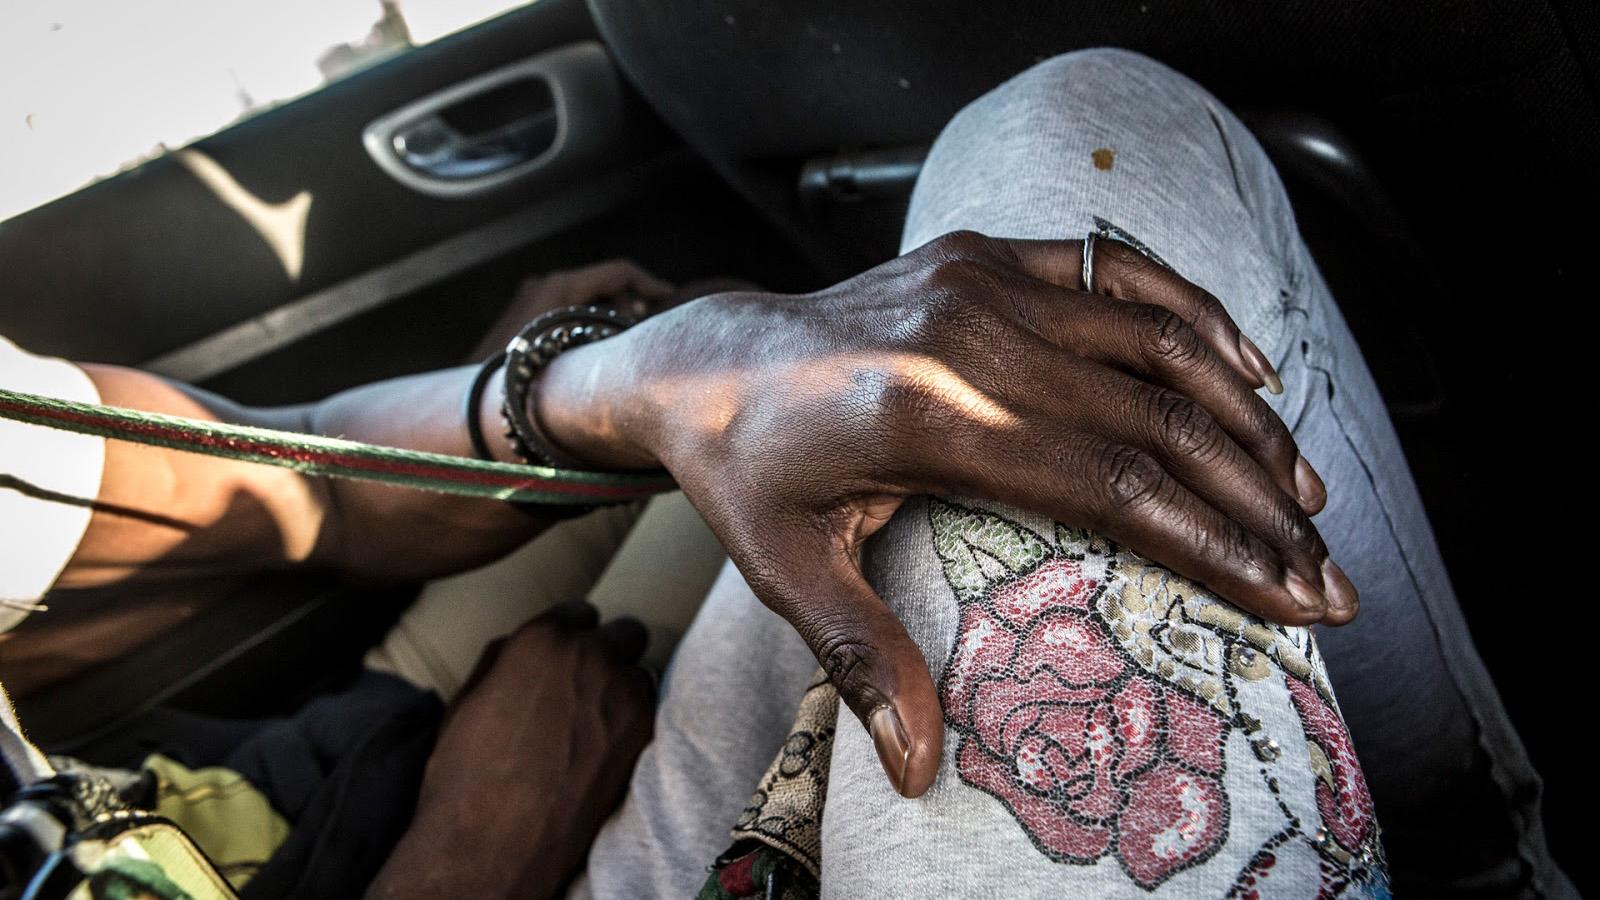 Lesbians in Senegal are left out of the gay rights movement organized around HIV prevention and treatment. And they're also left out of the women's movement: "Some women's groups ... don't want to have anything to do with gay women," says Ndeye Kebe.